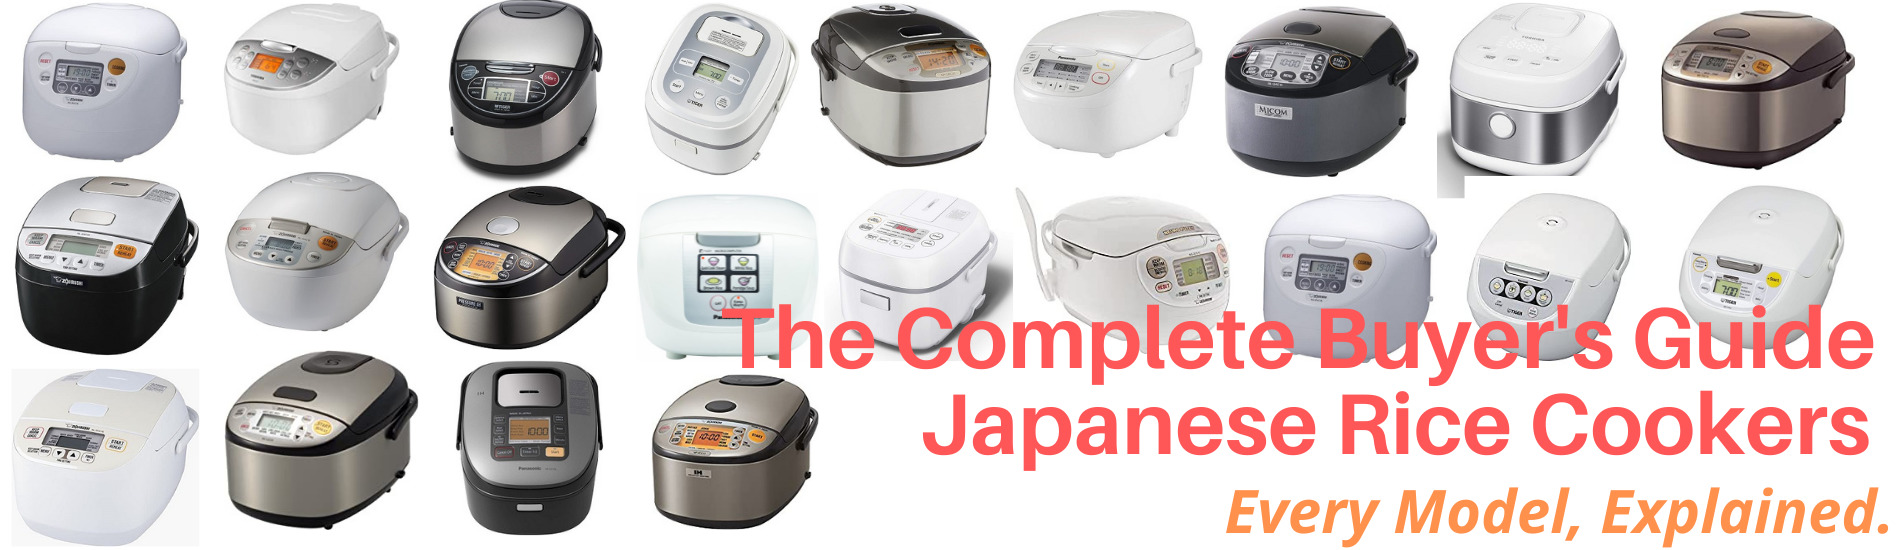 The Complete Buyer's Guide to Japanese Rice Cookers